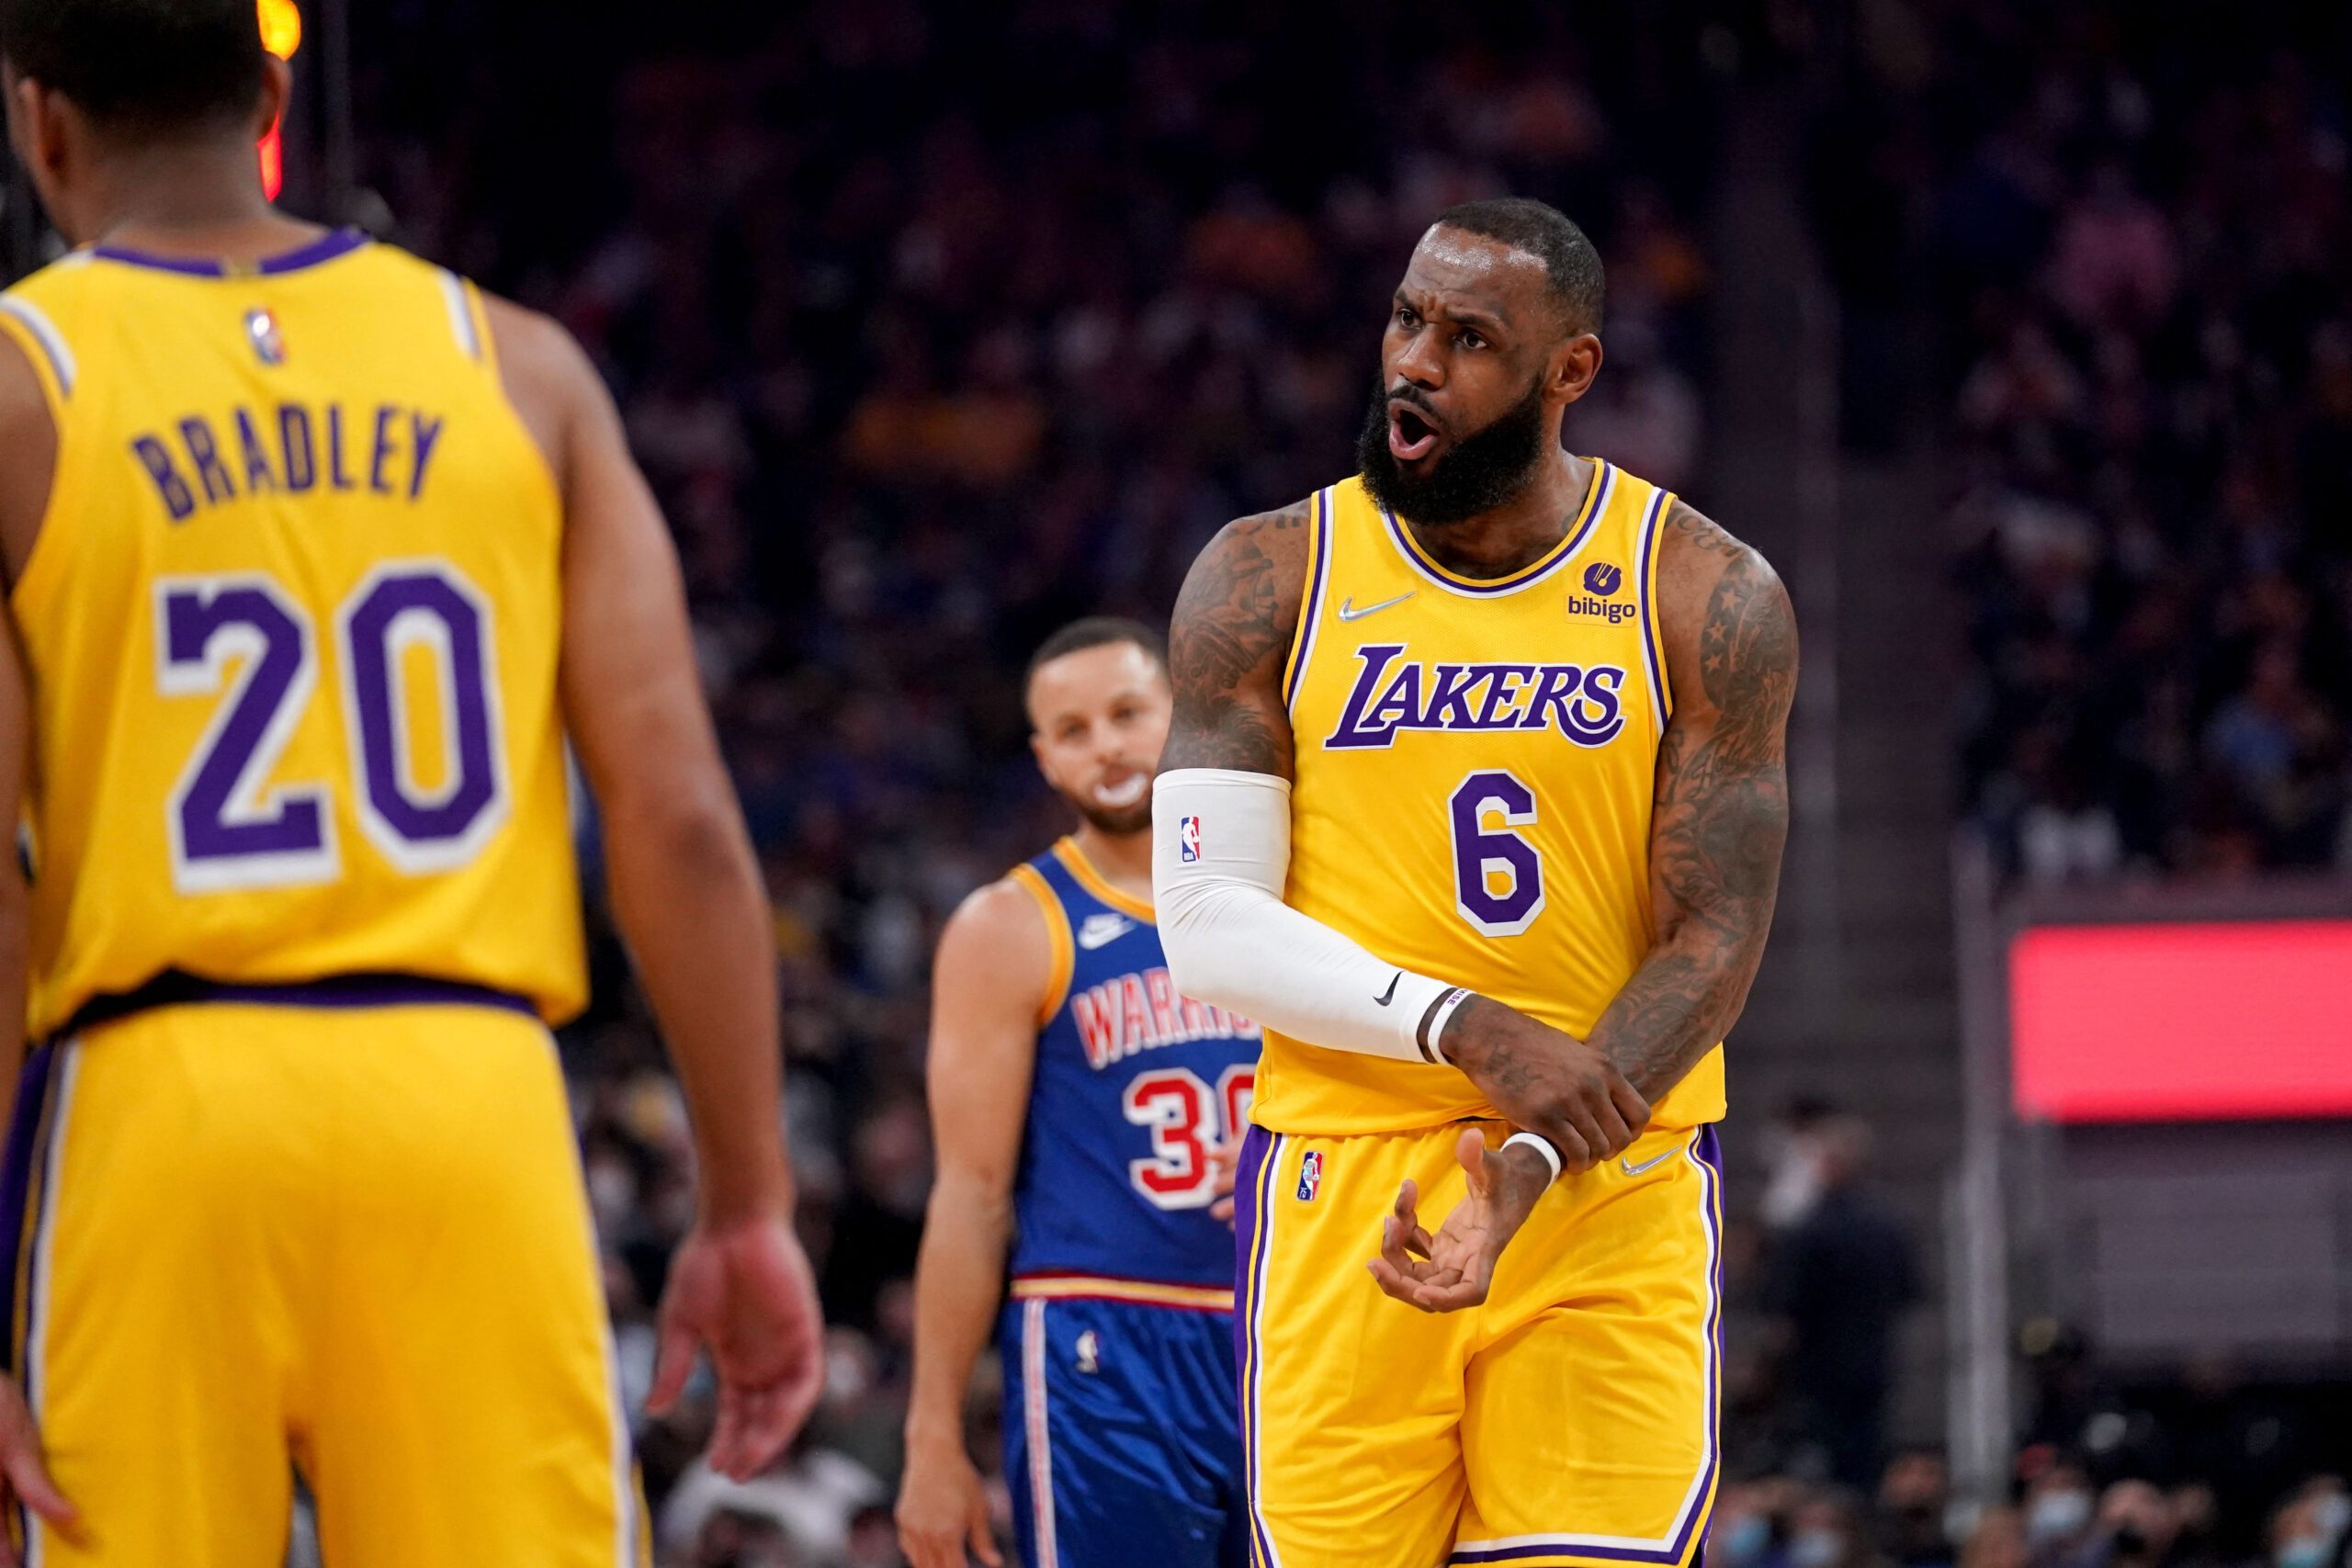 Jeanie Buss wants LeBron James to retire with Lakers